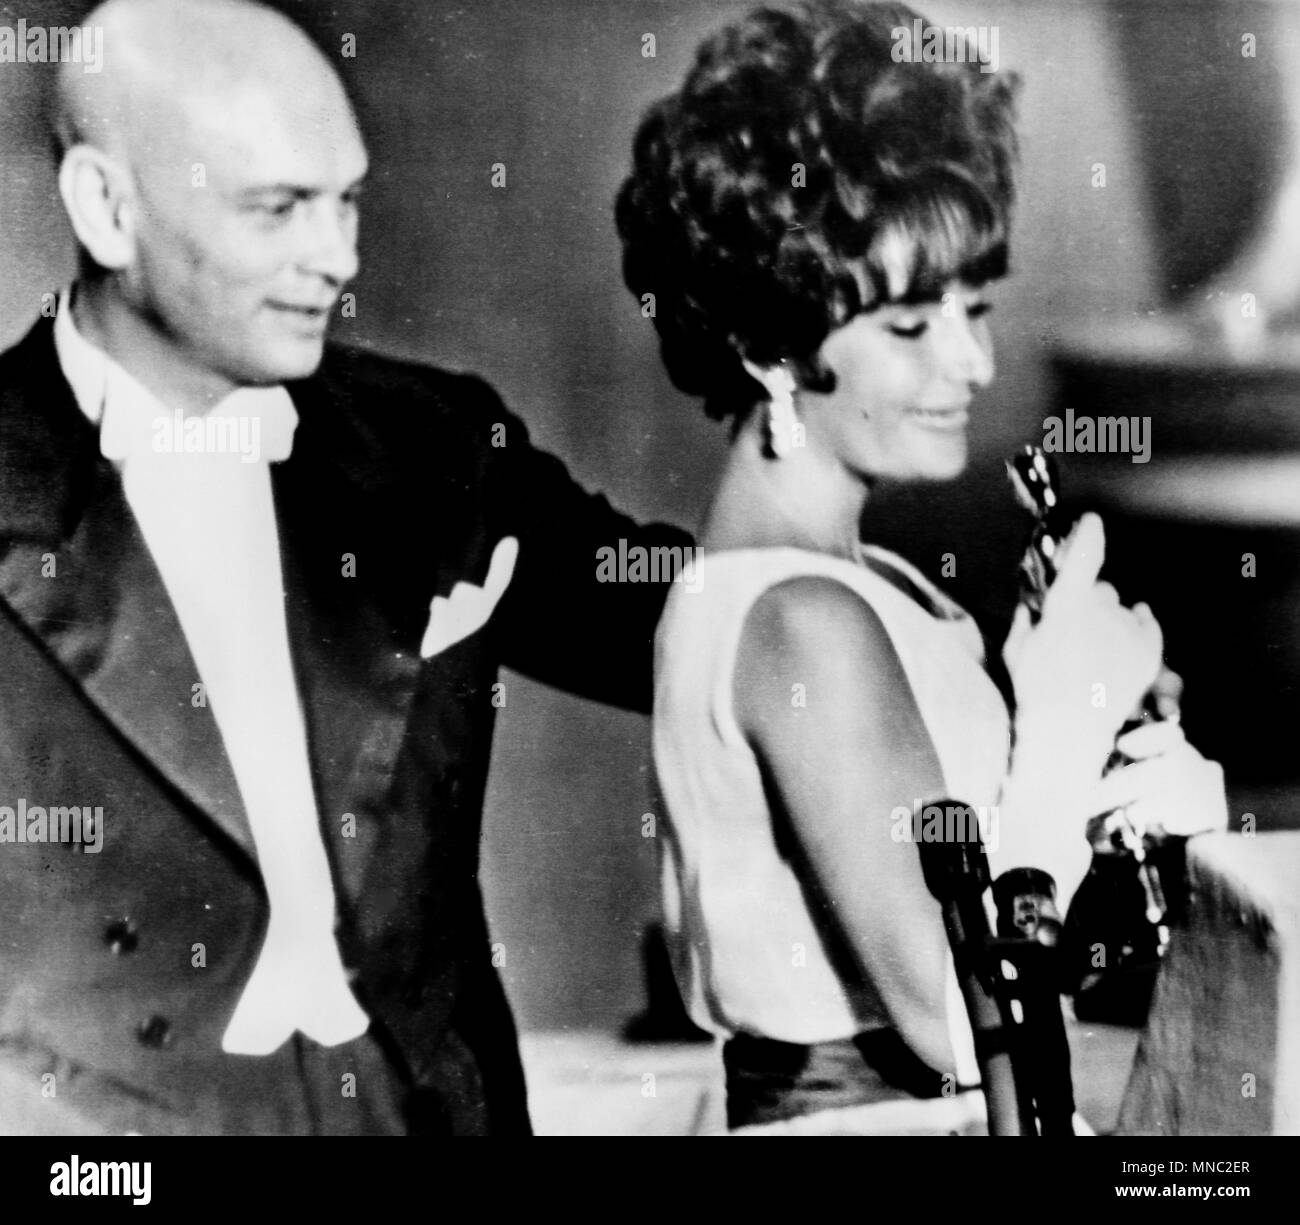 elizabeth taylor, takes the oscar as best actress in the film BUtterfield 8, yul brynner behind her, santa monica, los angeles, california, april 18, 1961 Stock Photo